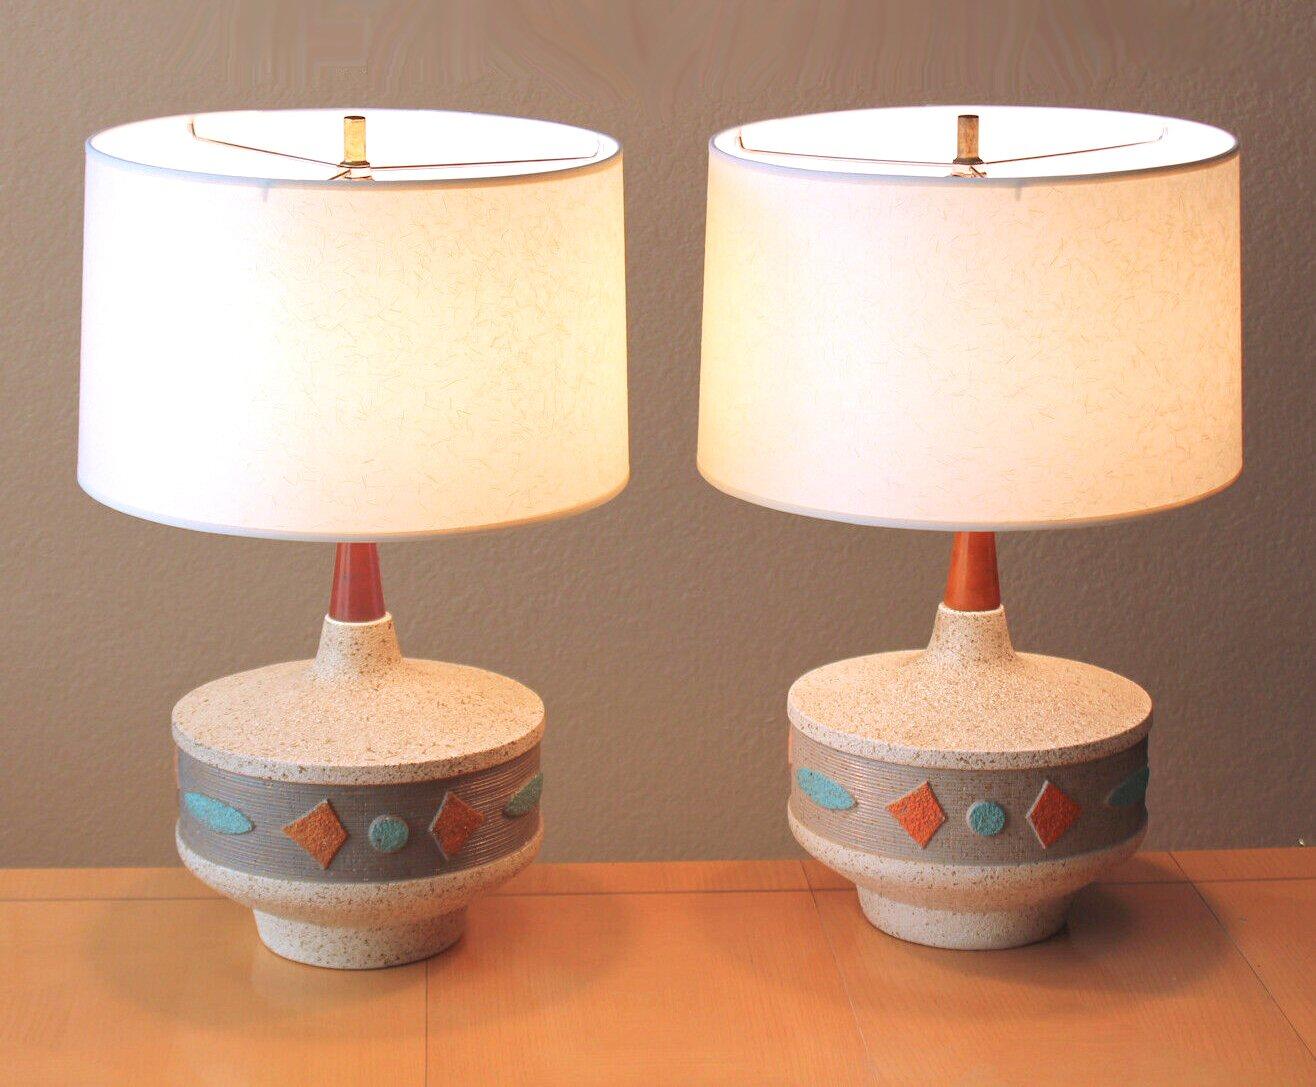 PREPARE FOR THE LANDING!


DANISH MODERN
MID CENTURY
UFO LAMPS

GOLD FLECKS IN PLASTER!

ATOMIC AWESOME!


DIMENSIONS:  APPROX.  24